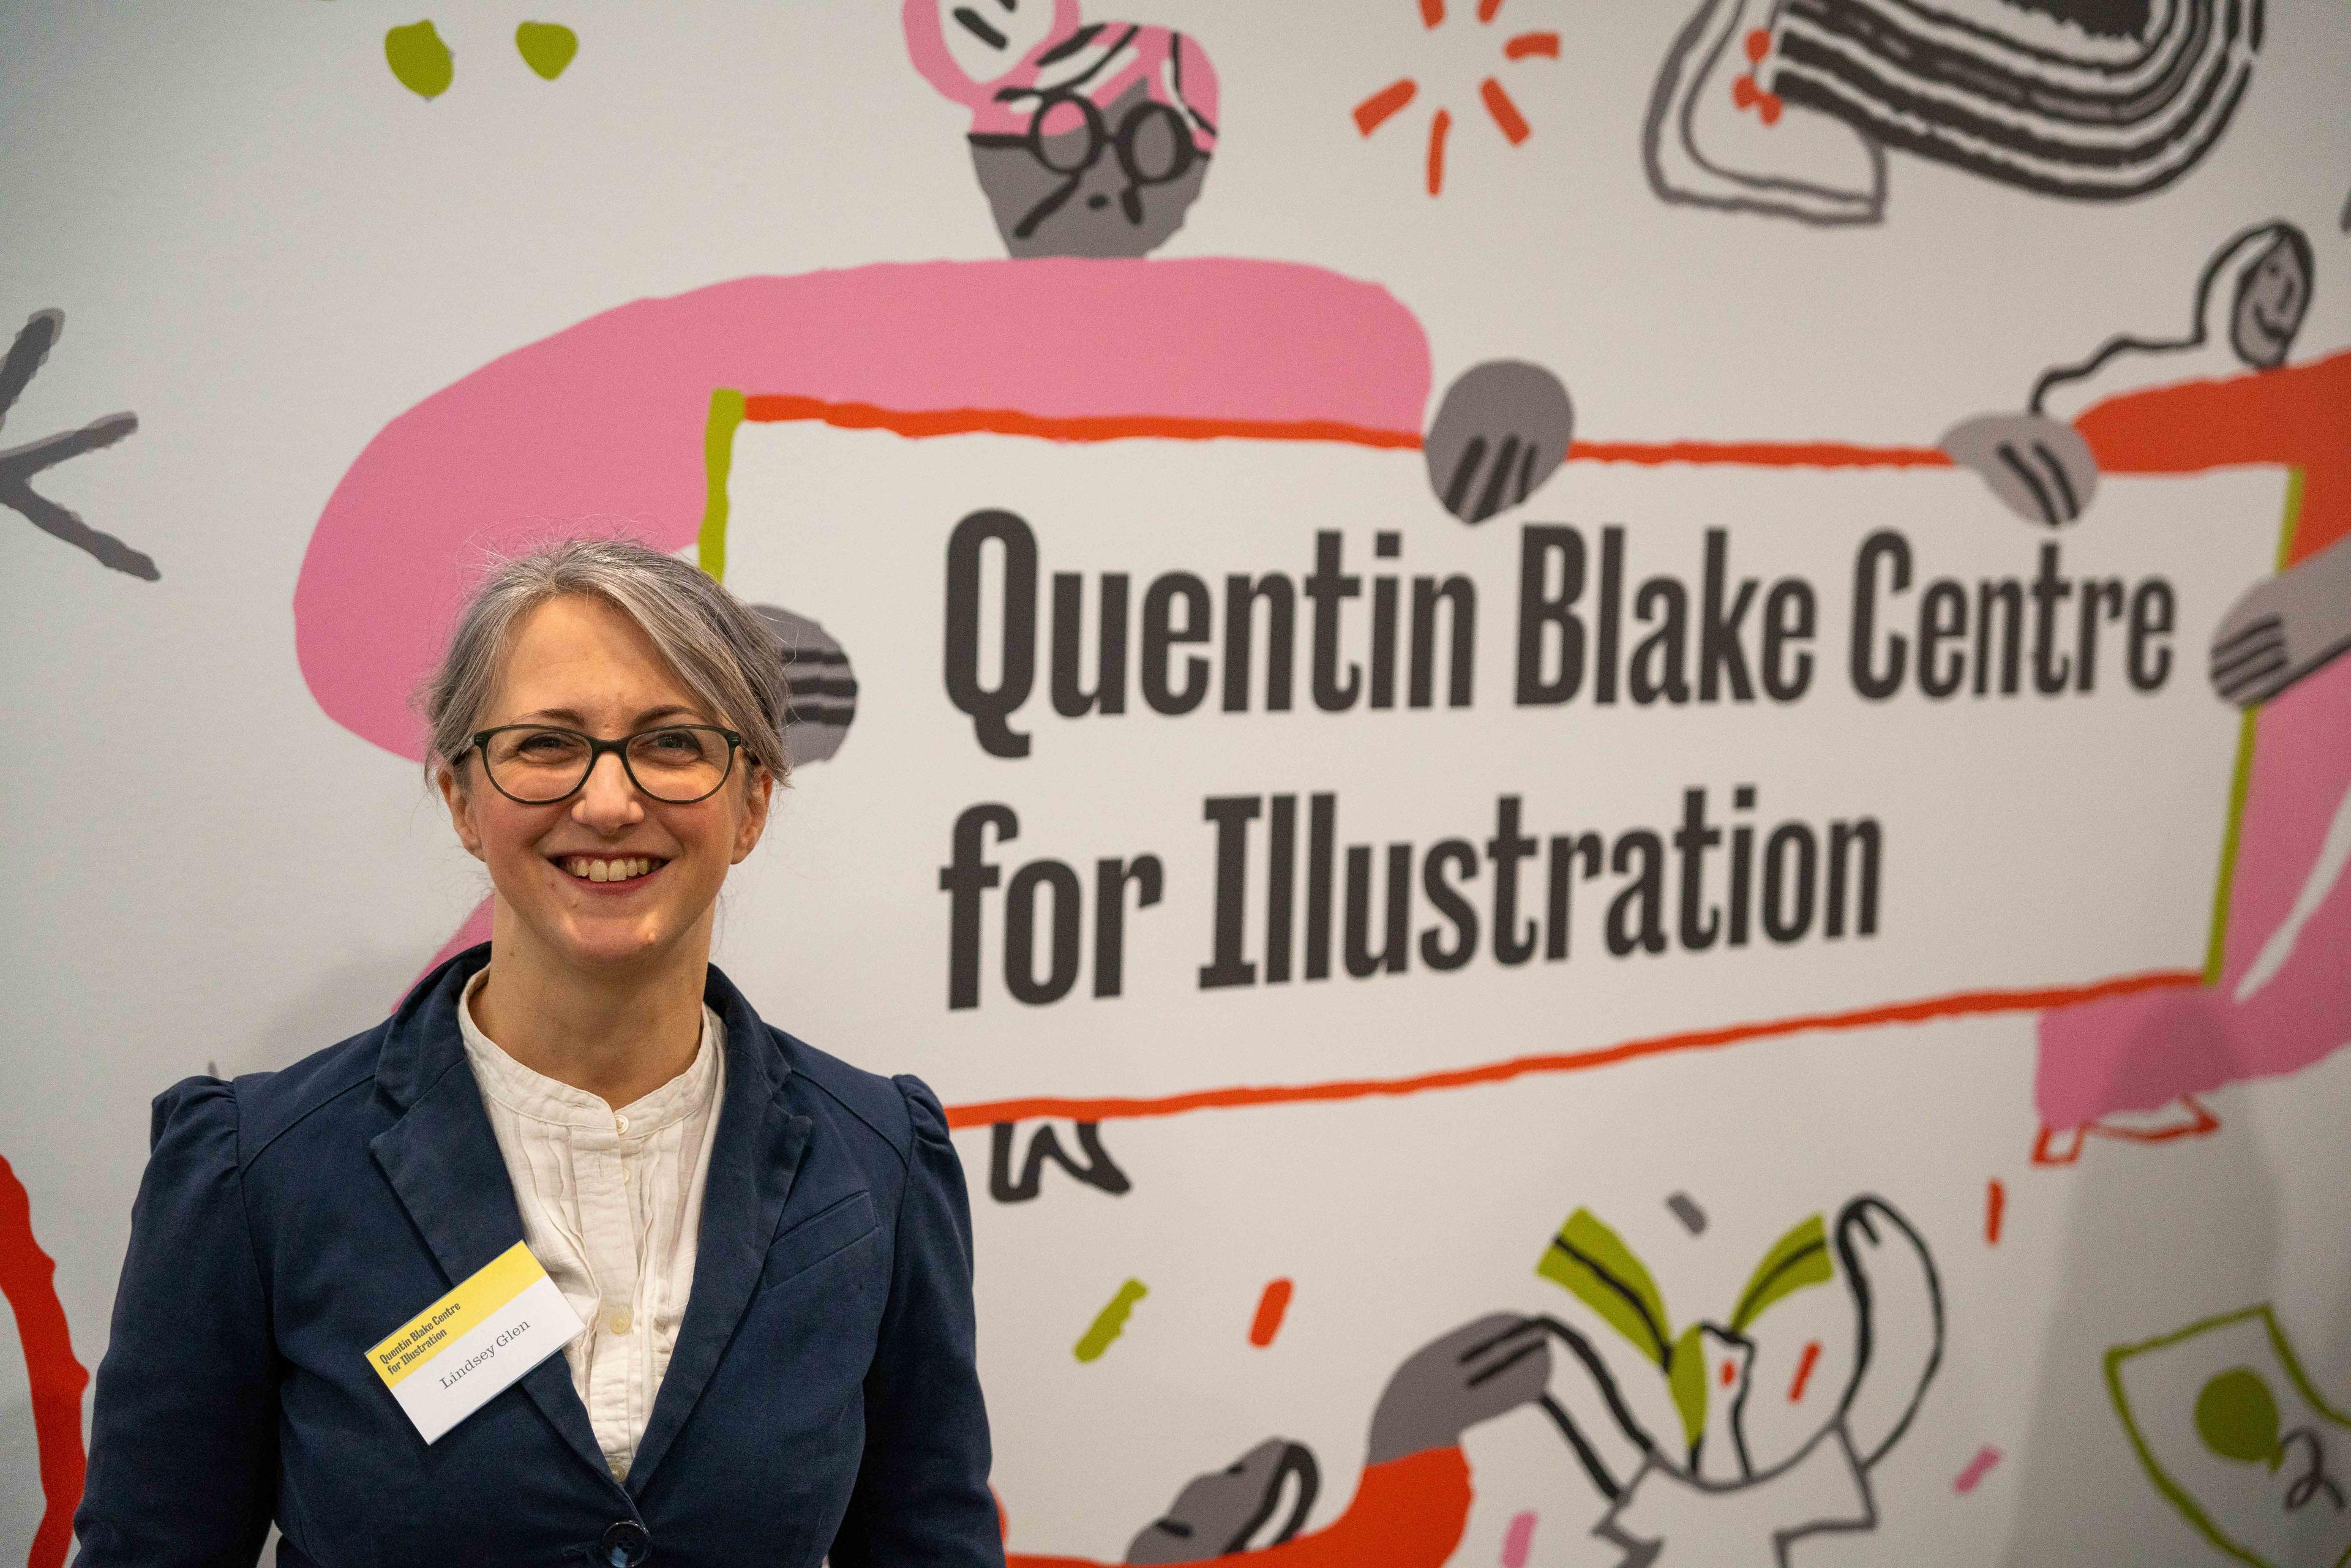 Photograph of a person standing and smiling in front of an illustrated wall with the wording 'Quentin Blake Centre for Illustration'.